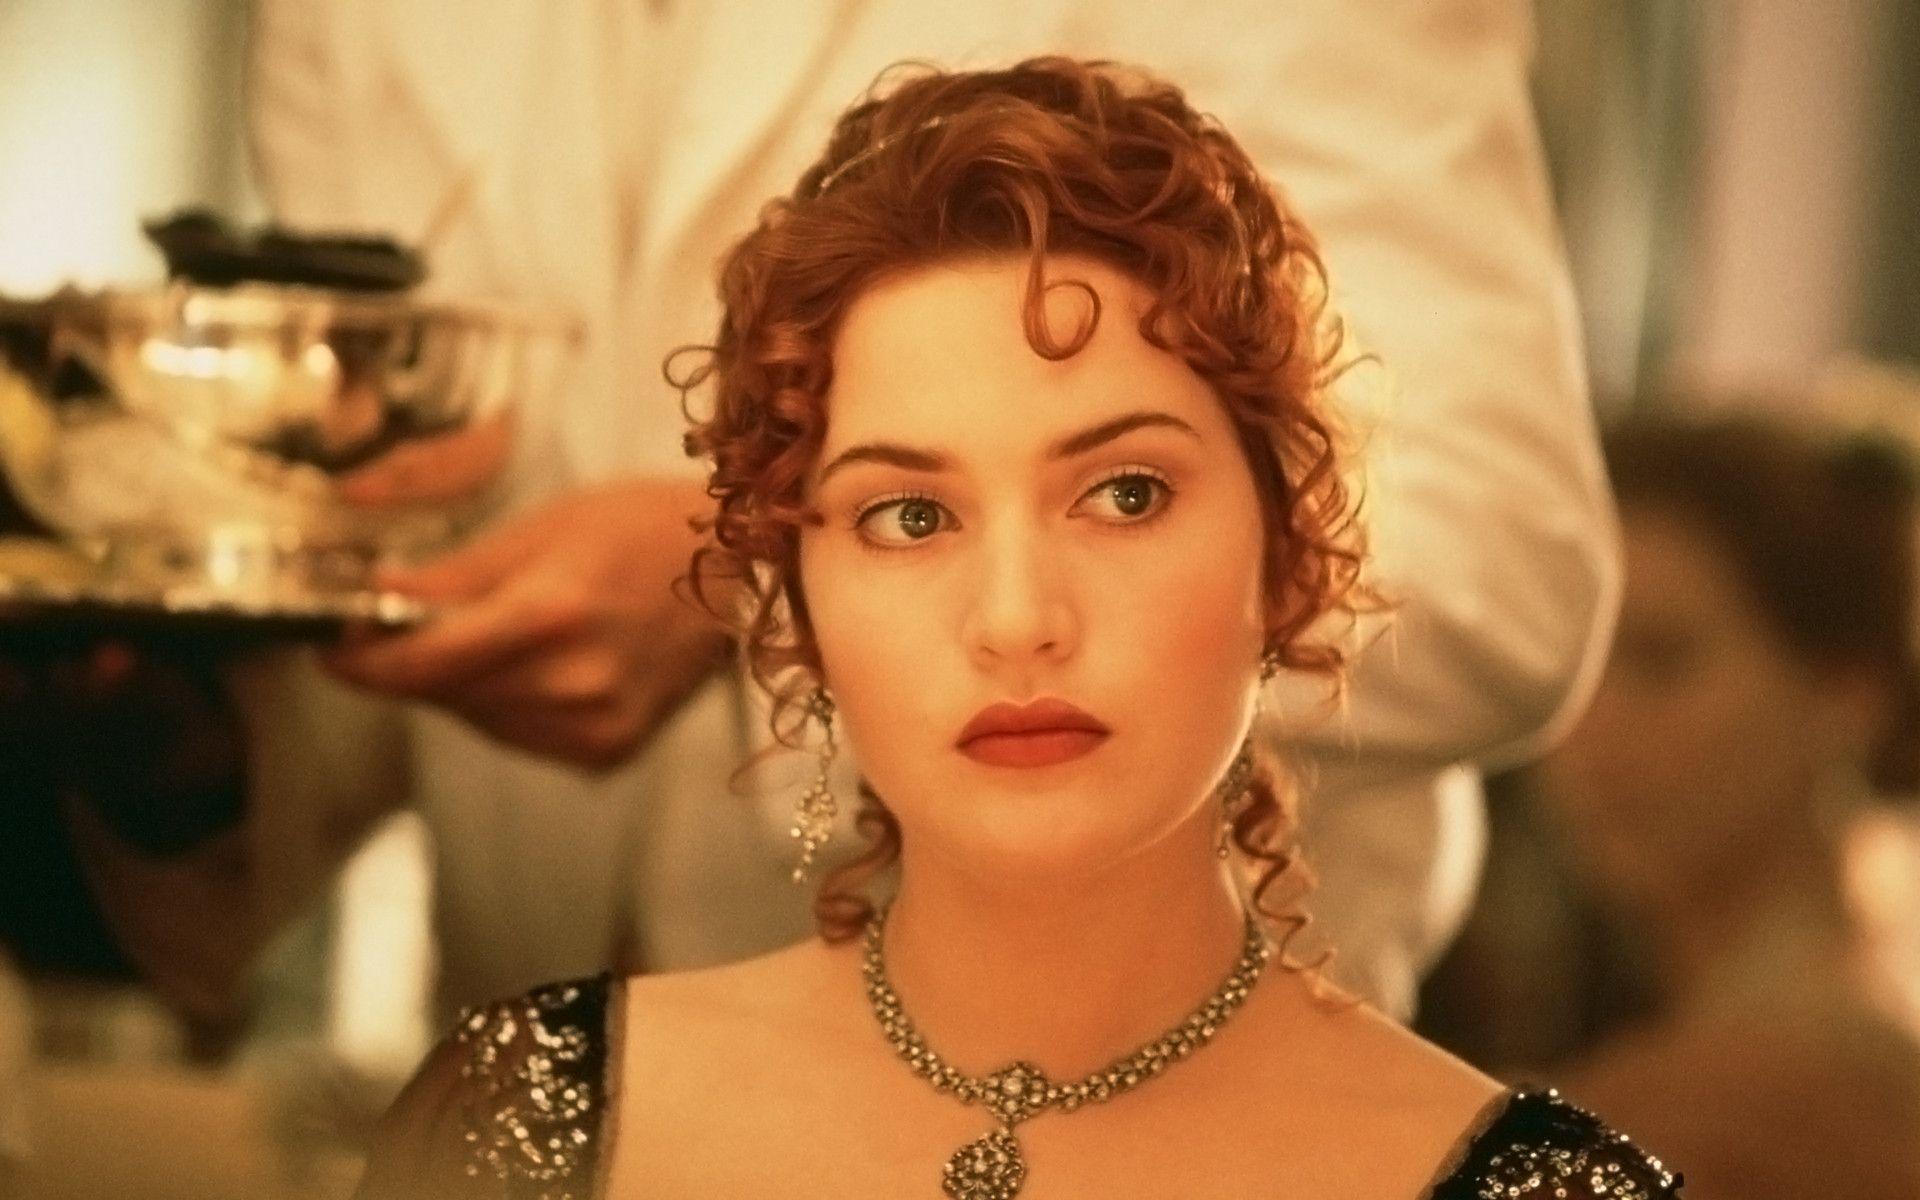 Kate Winslet in Titanic Movie Hd Wallpapers